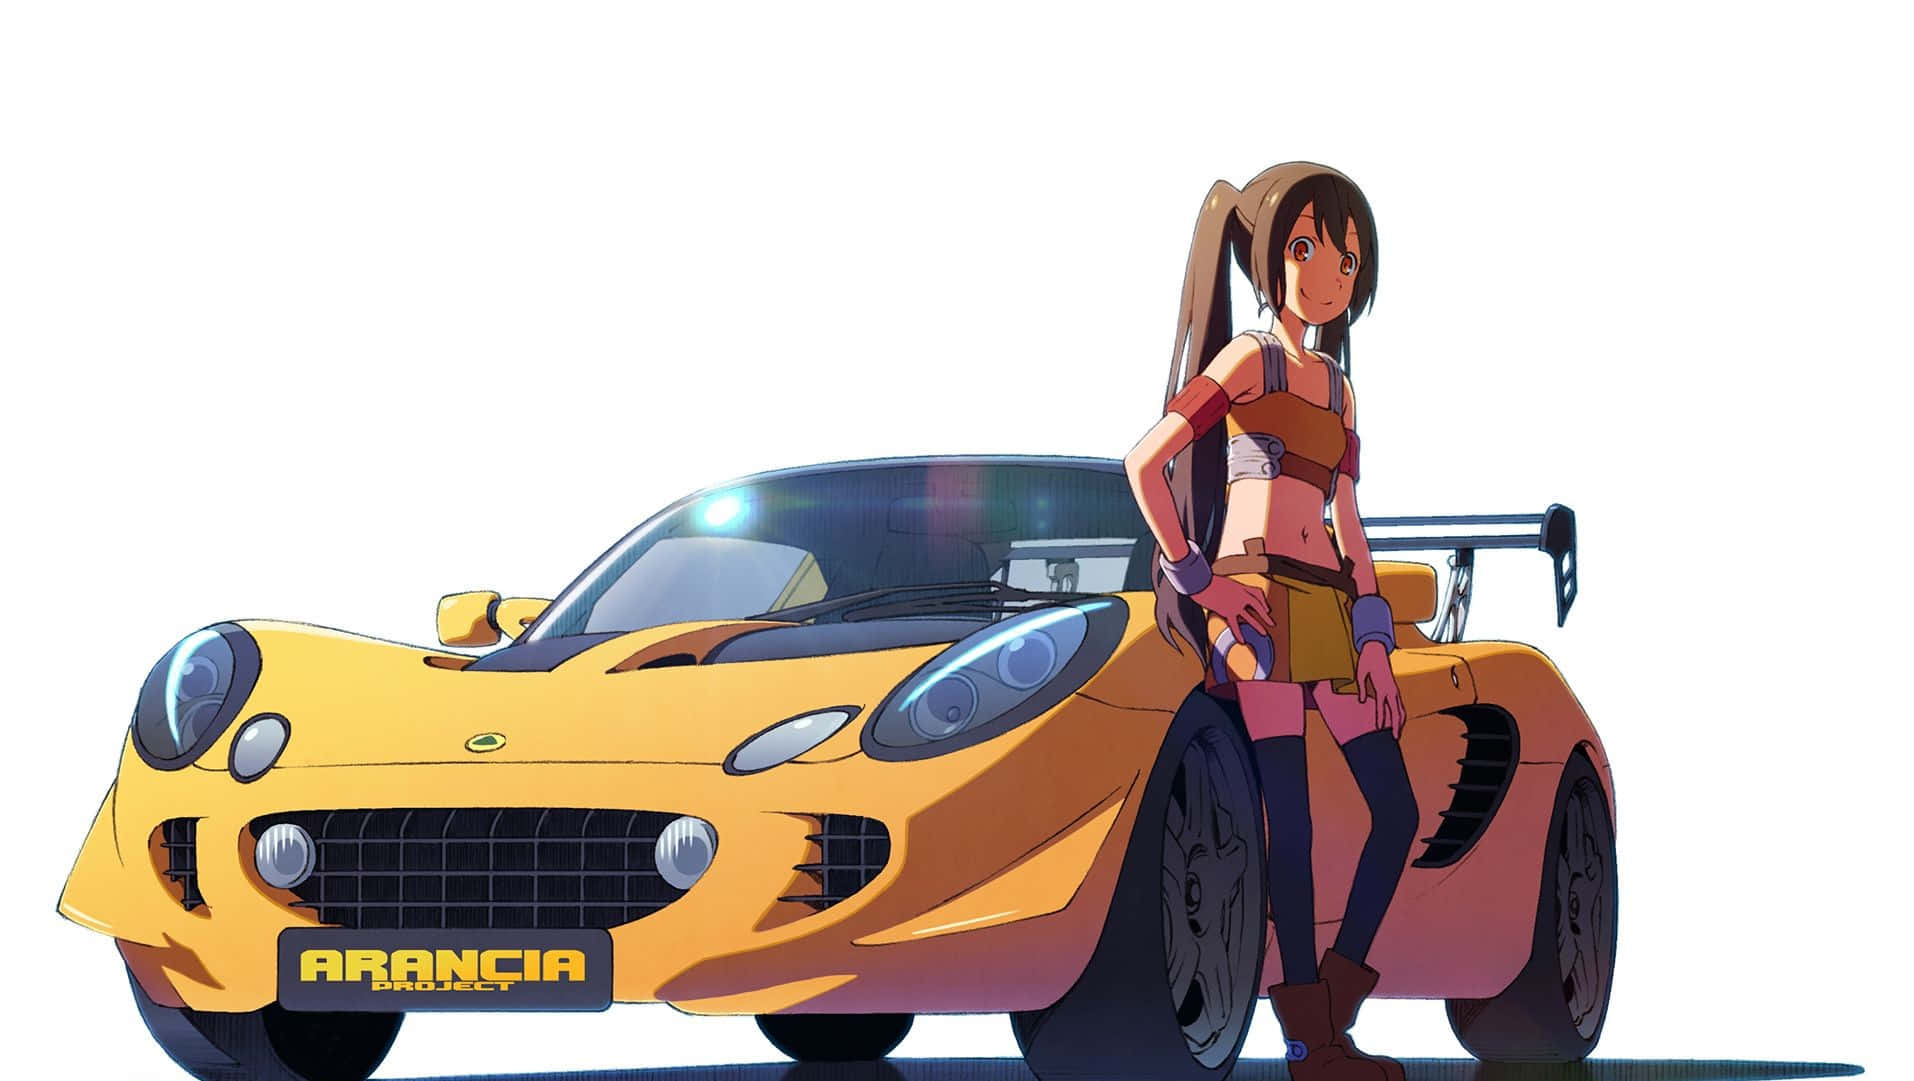 Speed Ahead in Style - Anime-Inspired Car Working Its Magic